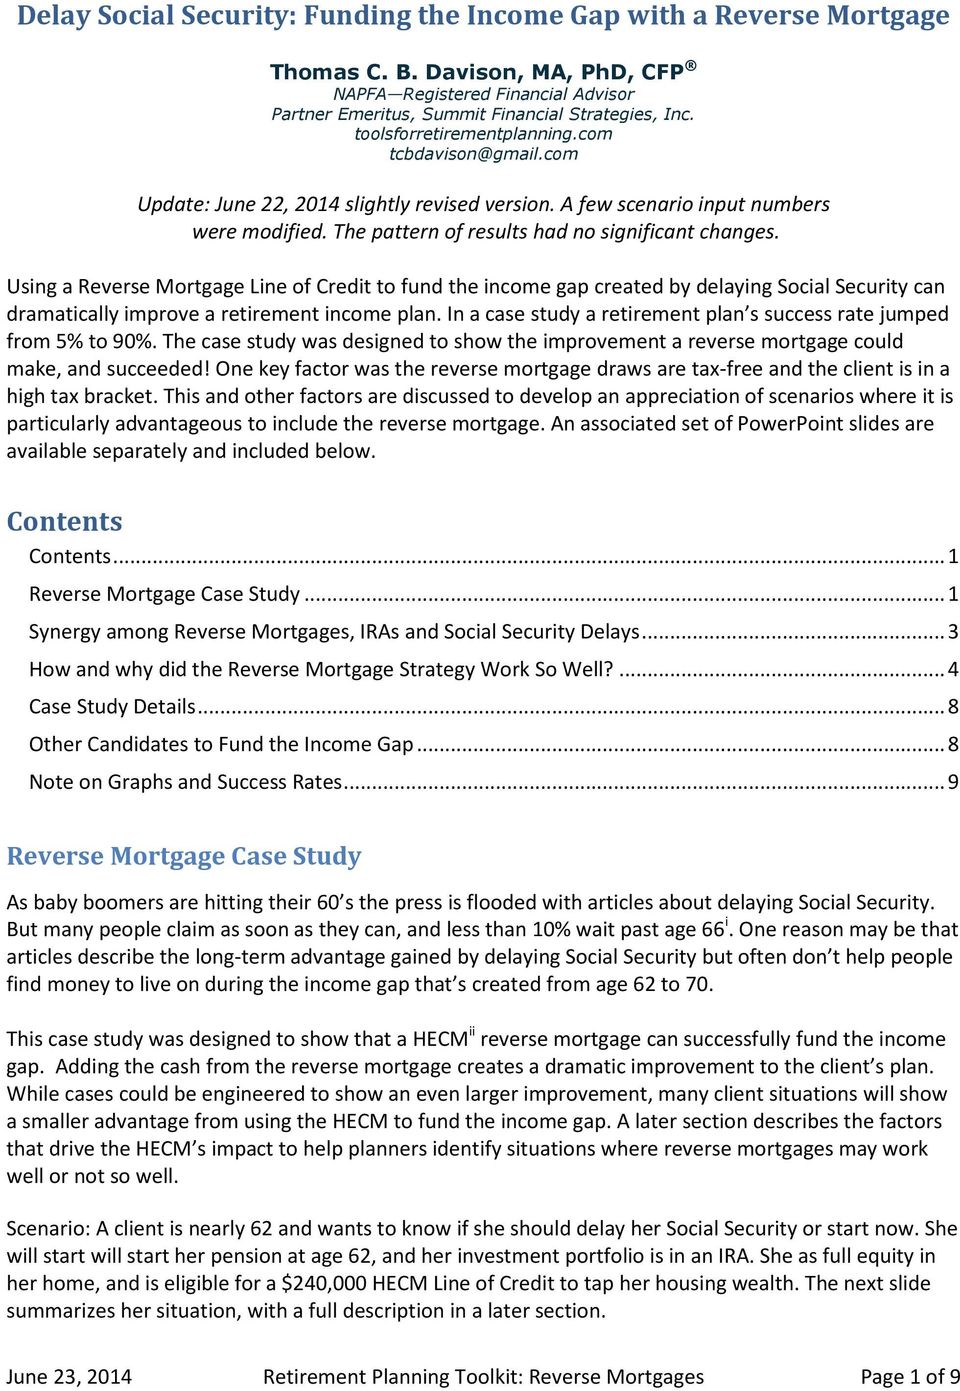 Using a Reverse Mortgage Line of Credit to fund the income gap created by delaying Social Security can dramatically improve a retirement income plan.